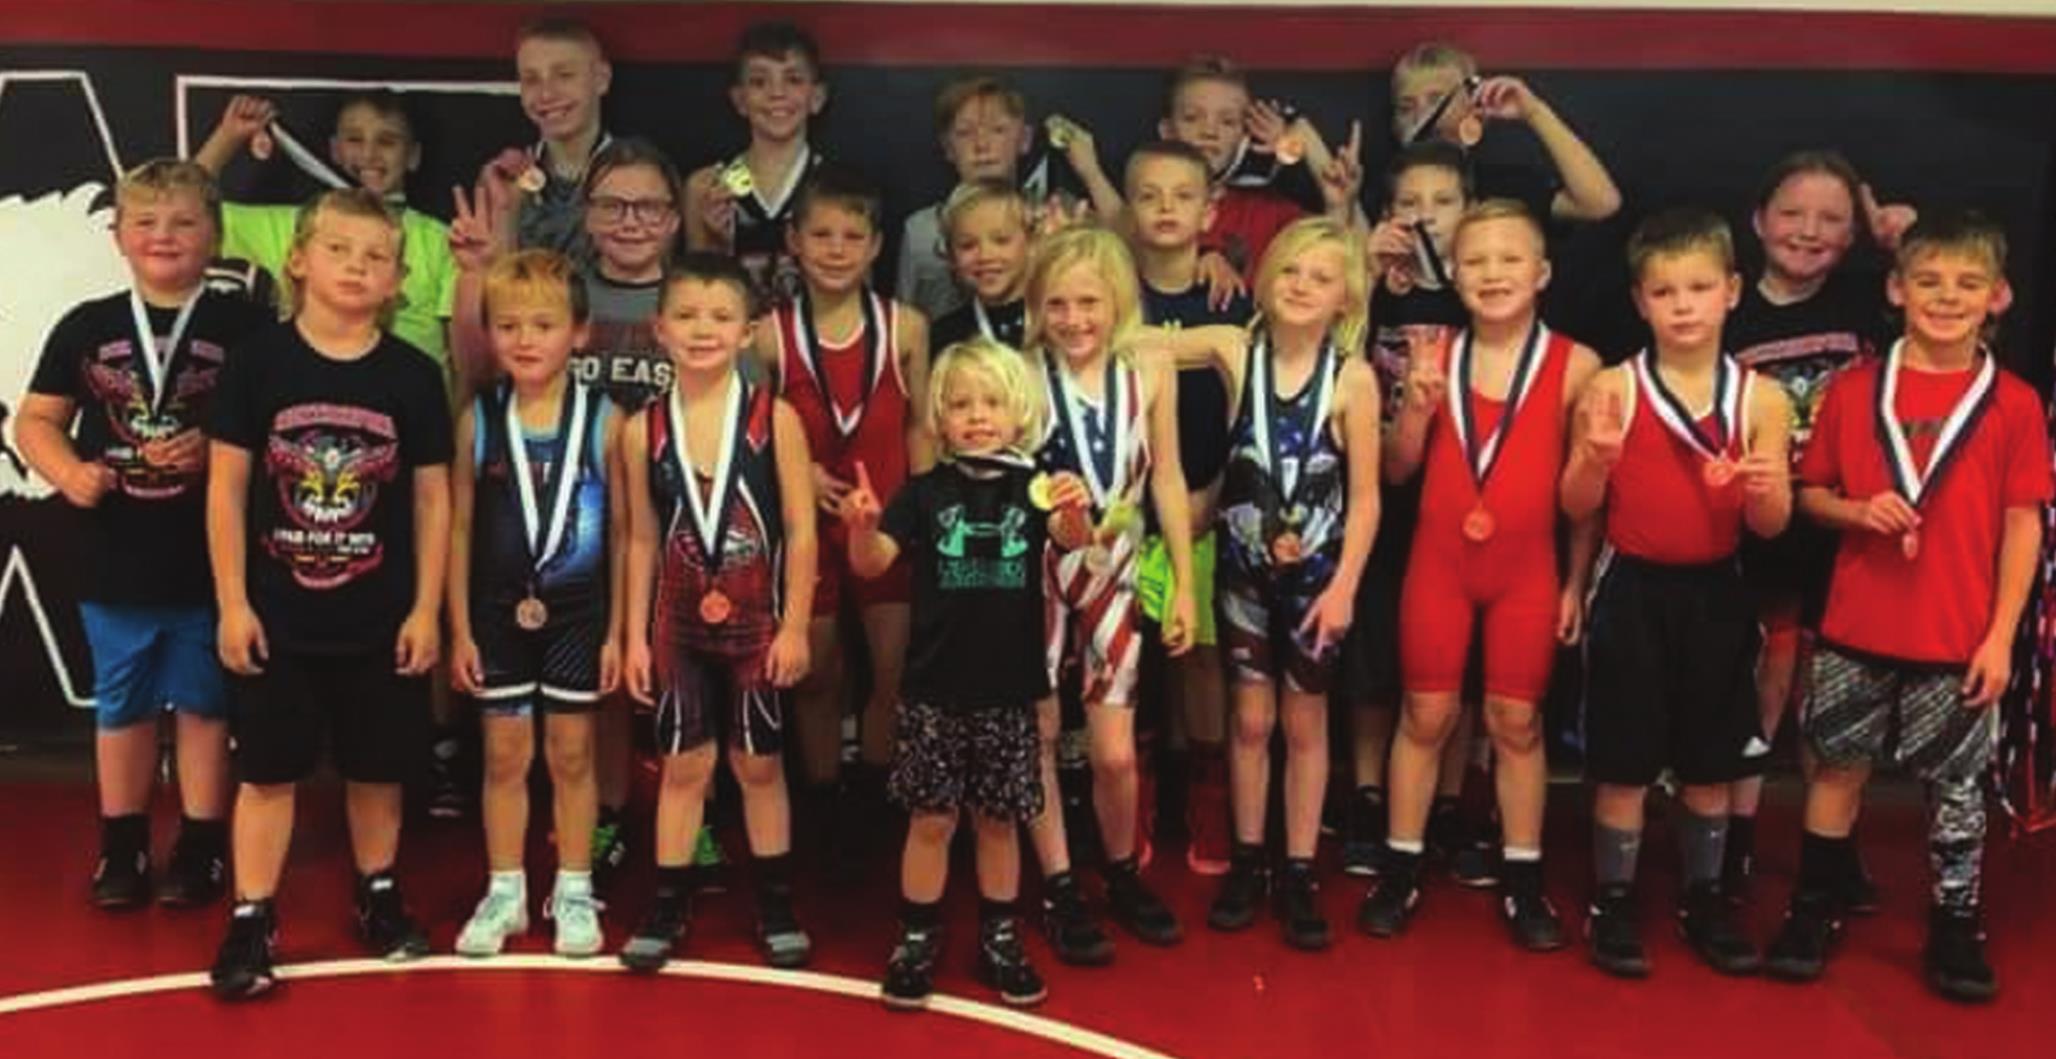 Weatherford youth wrestlers recently participiated in a tournament in Kingfisher. Wrestlers pictured are the ones who placed during the tournament. Provided